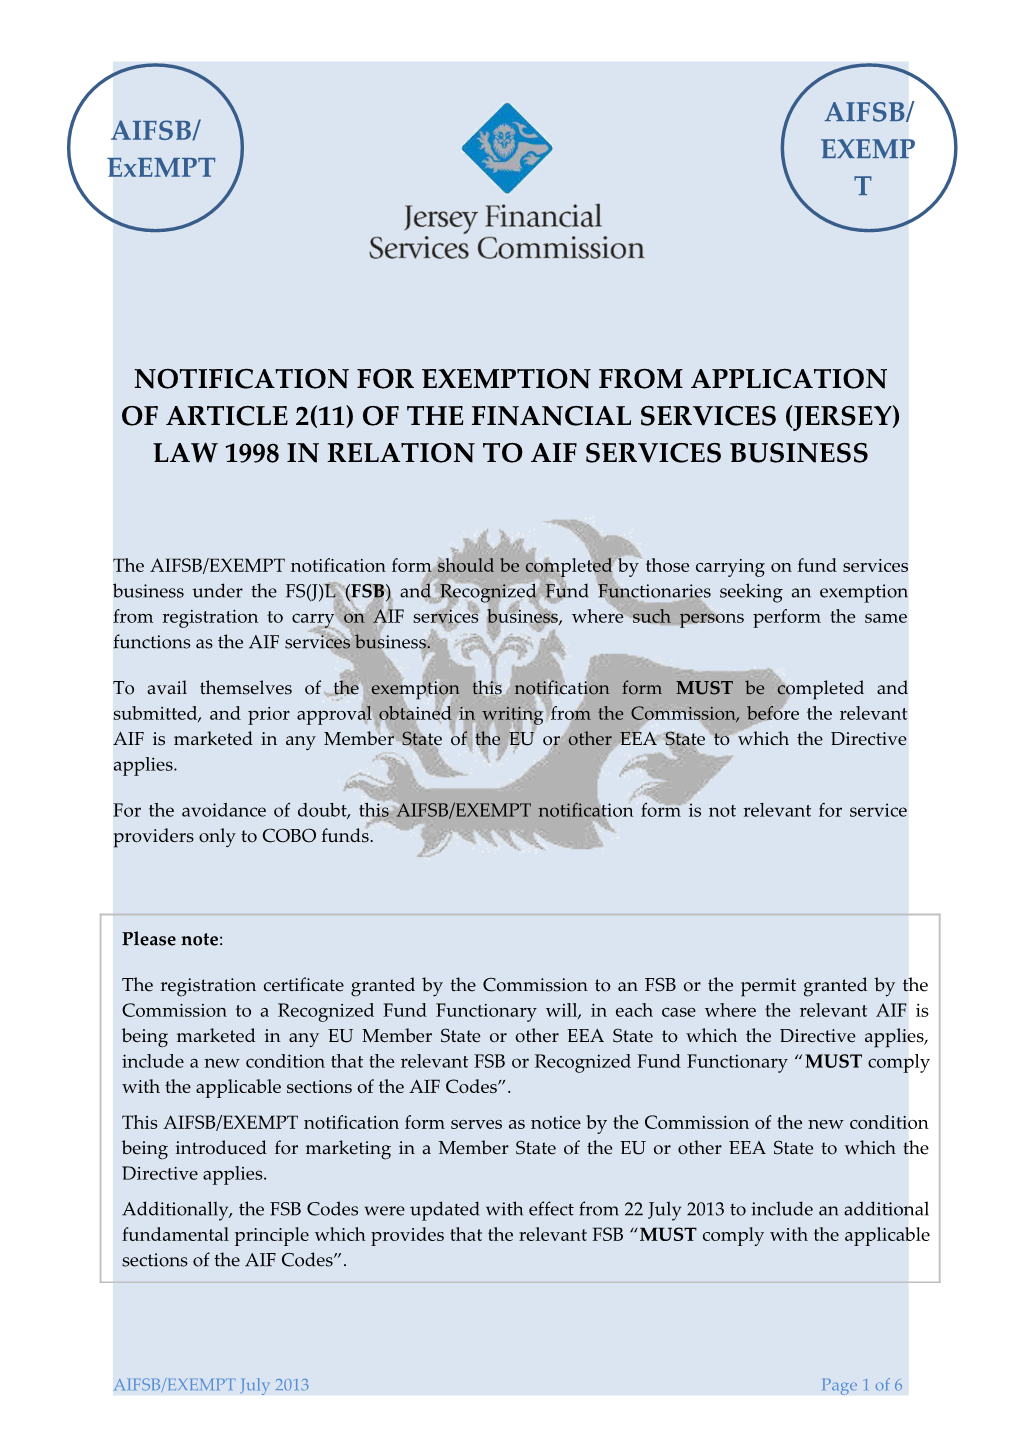 NOTIFICATION for EXEMPTION from APPLICATION of Article 2(11) of the Financial Services